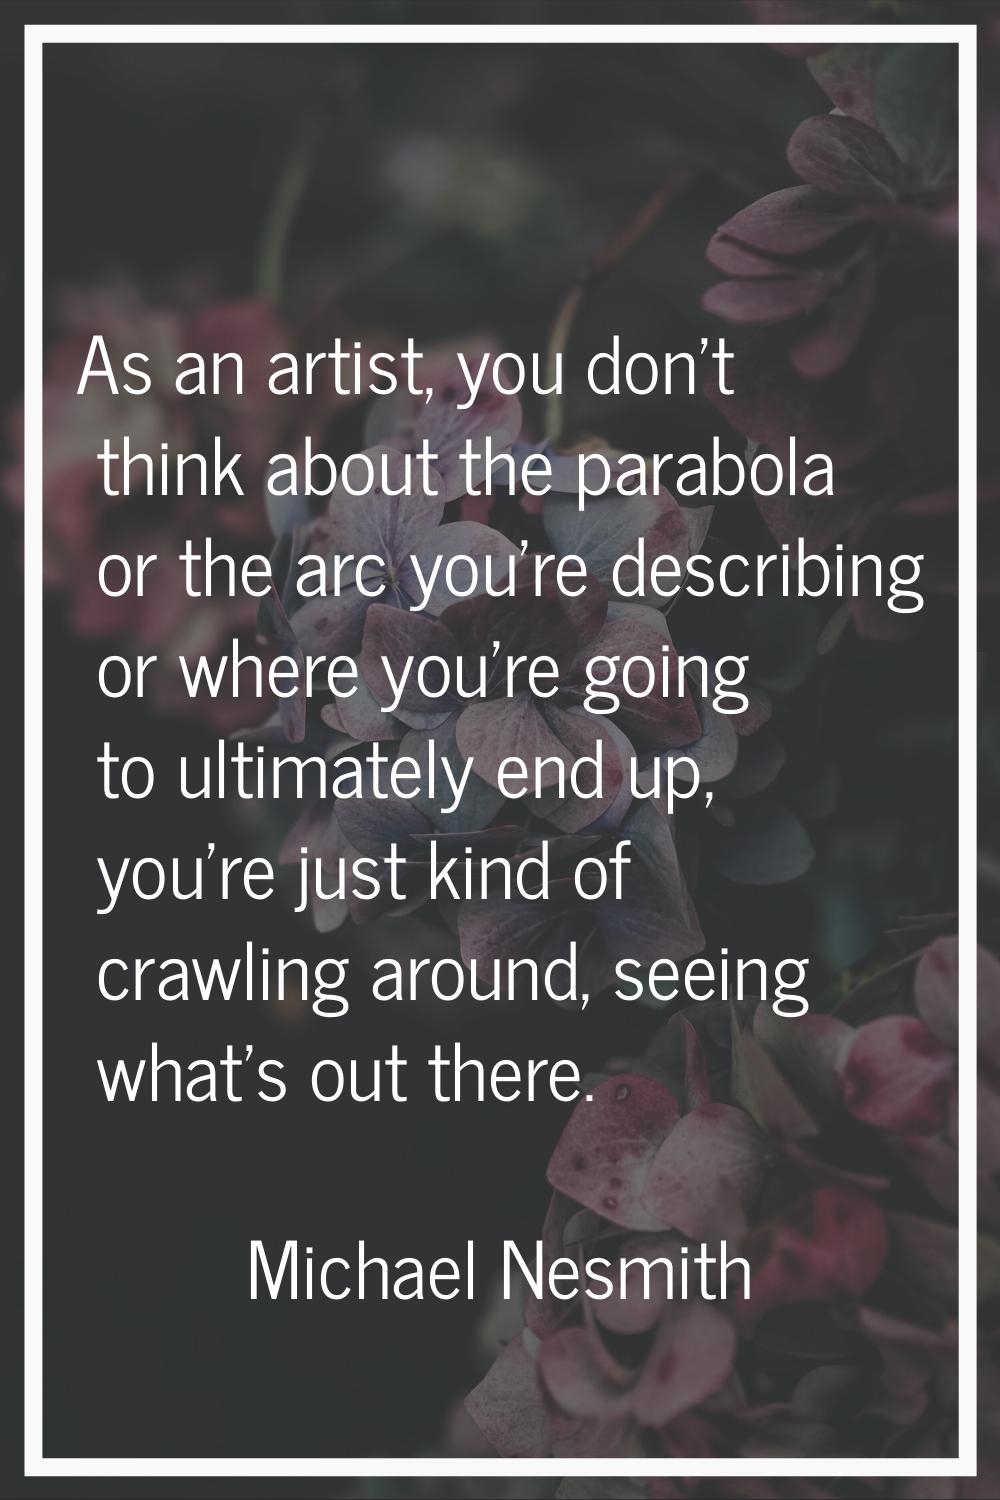 As an artist, you don't think about the parabola or the arc you're describing or where you're going